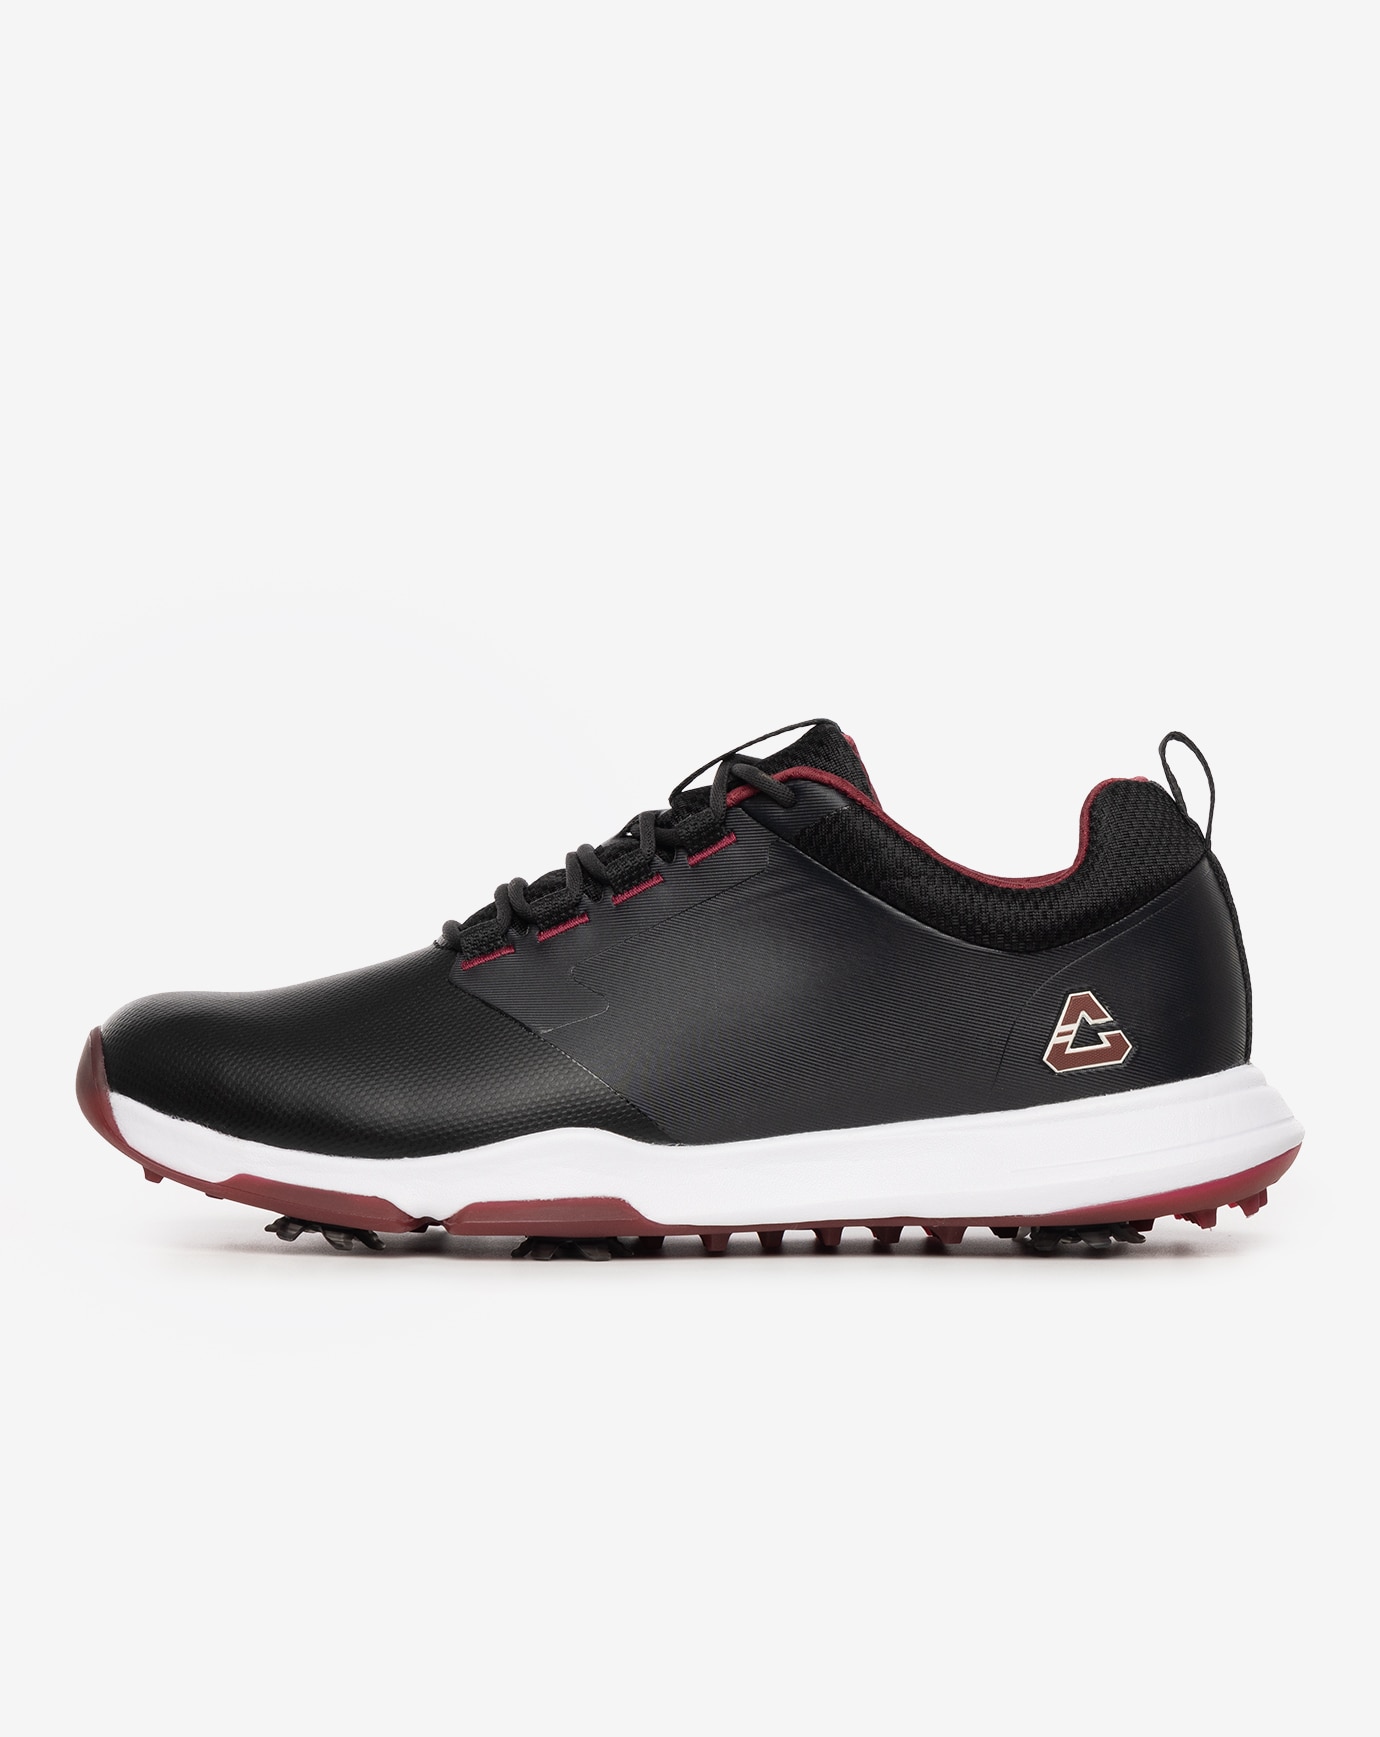 THE RINGER SPIKED GOLF SHOE Image 1